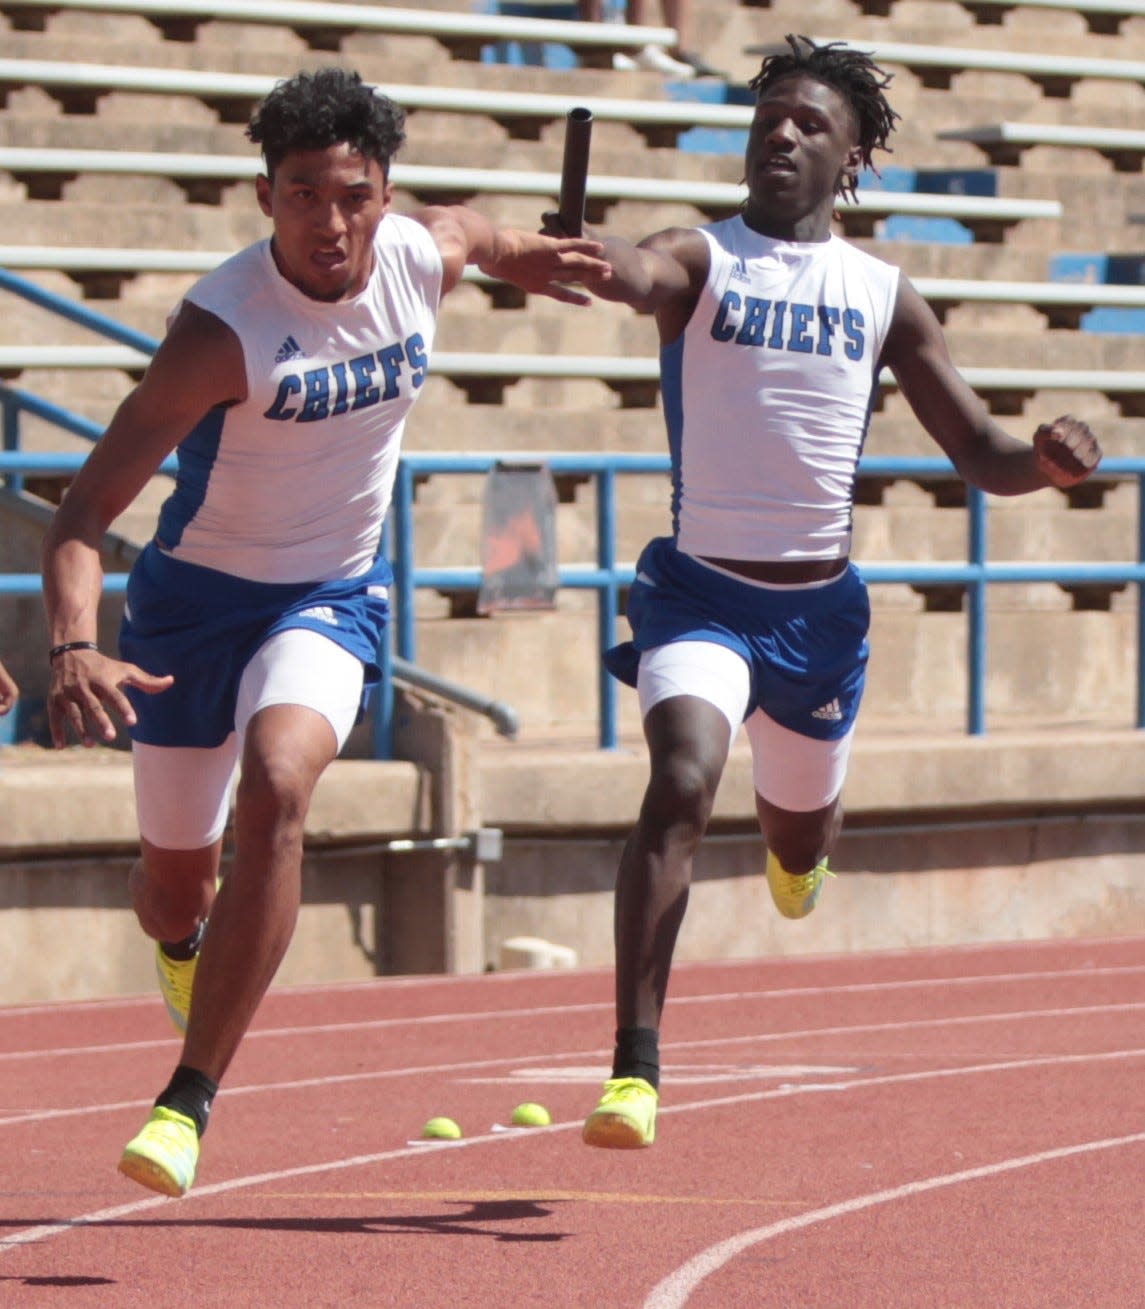 San Angelo Lake View's Brandon Durio, right, passes the baton to teammate Derrick Taylor in the boys 4x200-meter relay at the District 3-4A Track and Field Meet Thursday, April 14, 2022, at San Angelo Stadium.